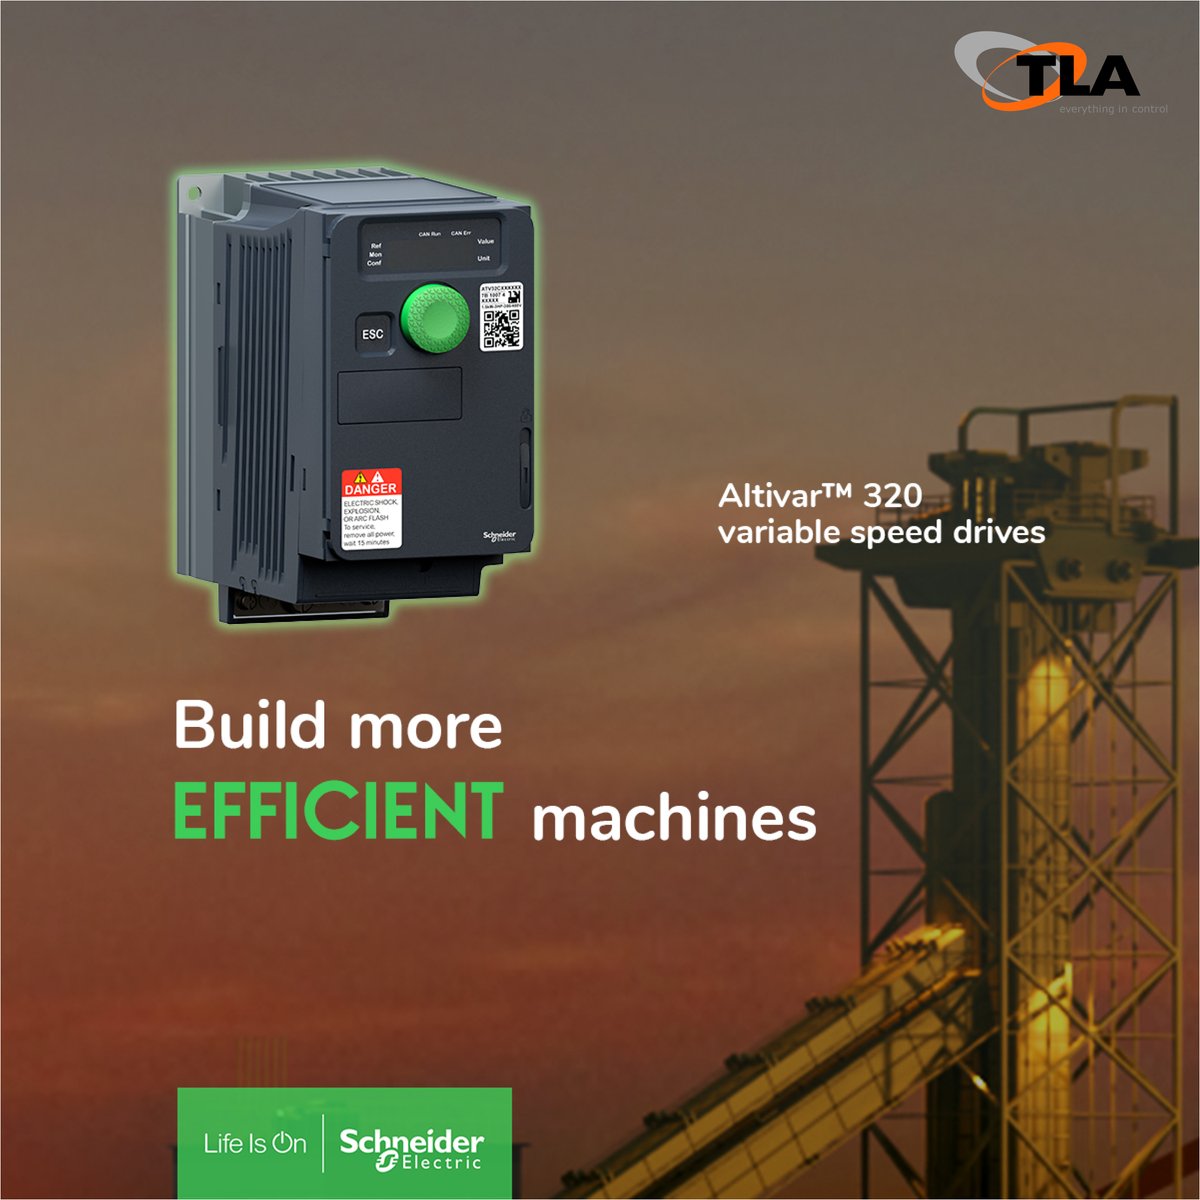 Powerful, robust and flexible - the Schneider Electric Altivar Machine ATV320 range of variable speed drives redefine possibilities for machine manufacturers for building more effective machines at optimized build costs 👇
#variablespeeddrives #automation #machinebuilding